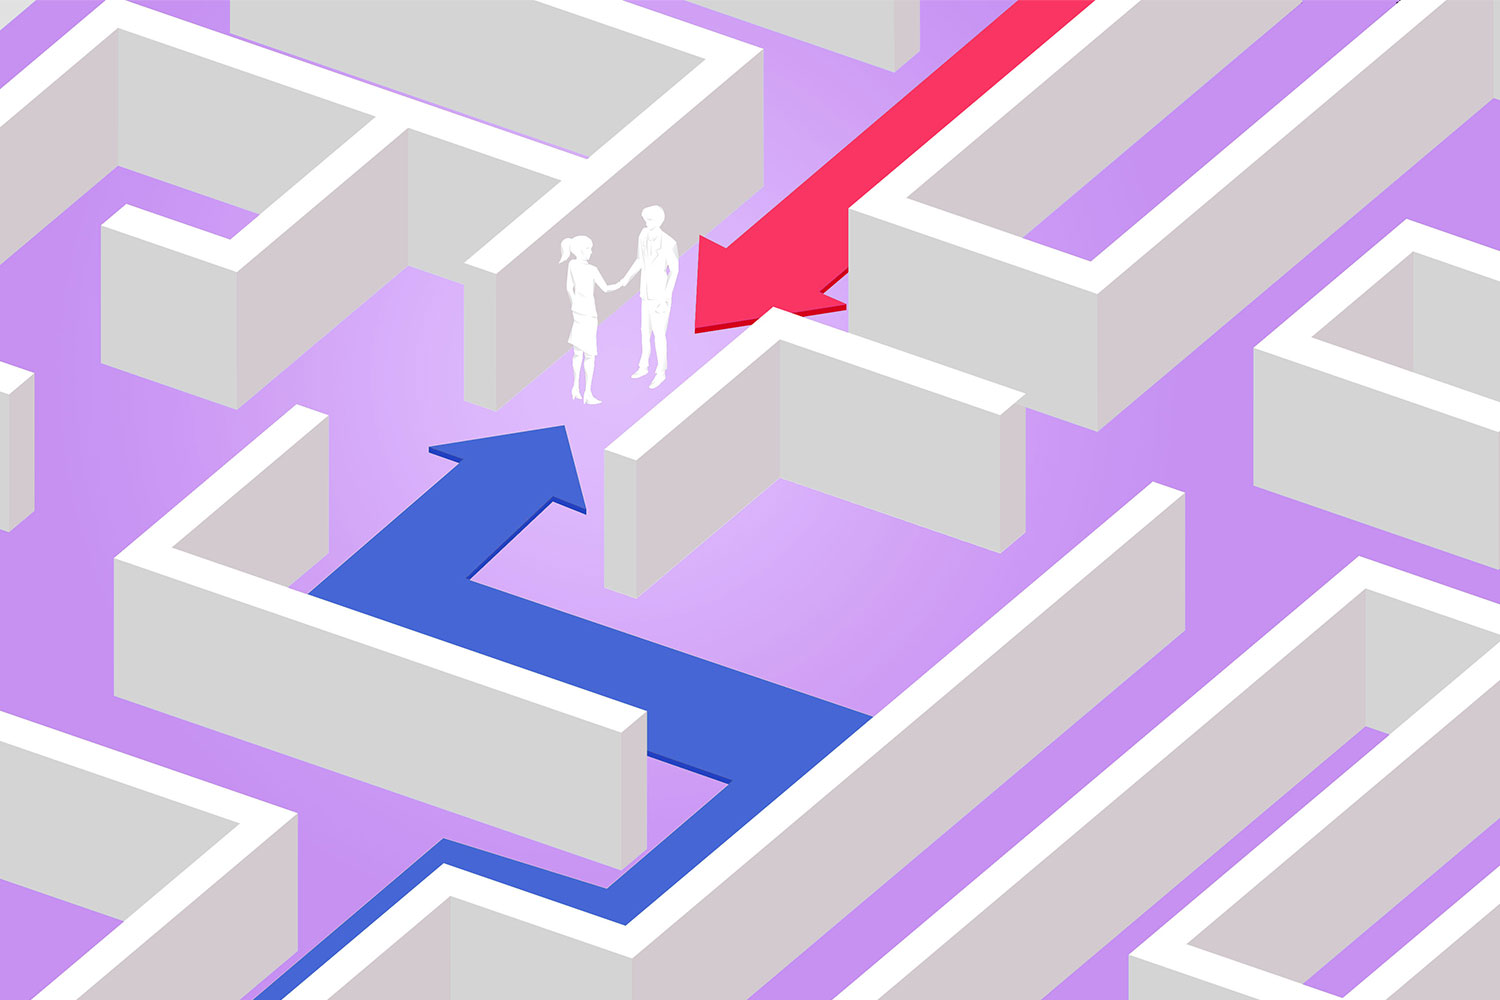 Two people meeting in the middle of a maze on a light purple background. behind each person is an arrow showing the path they took.